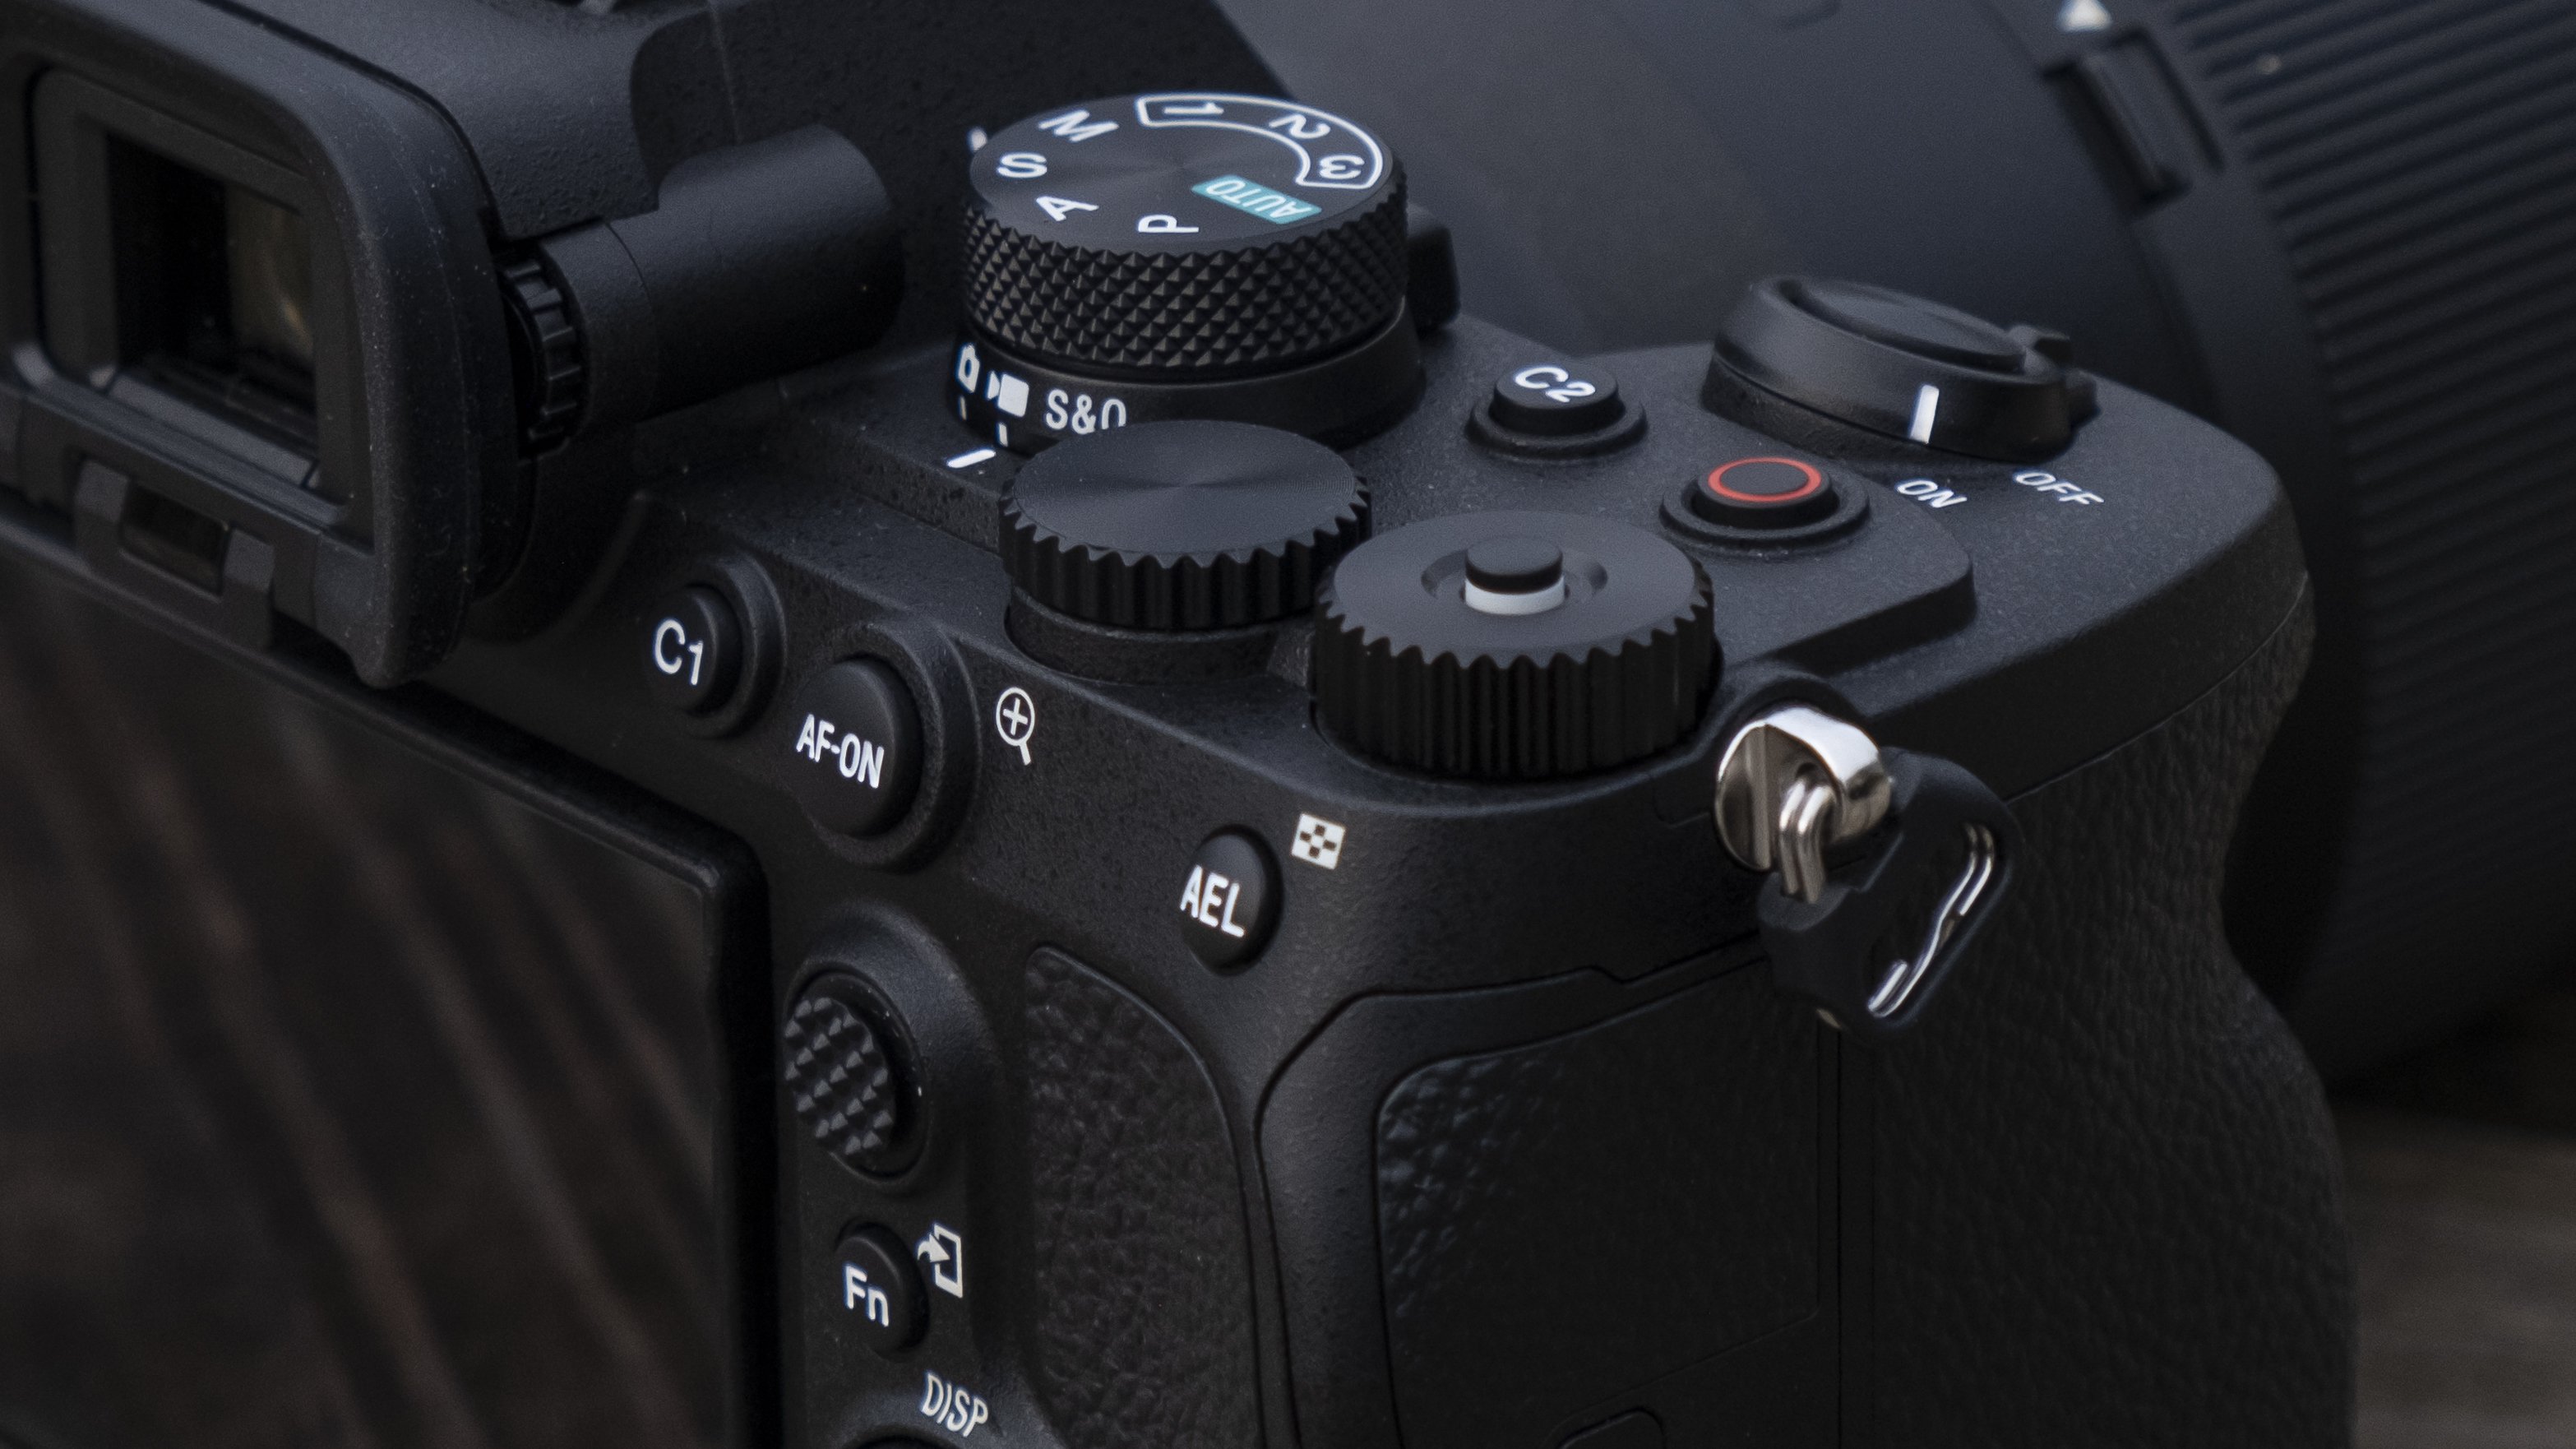 The Sony A7 IV camera's top dials and controls